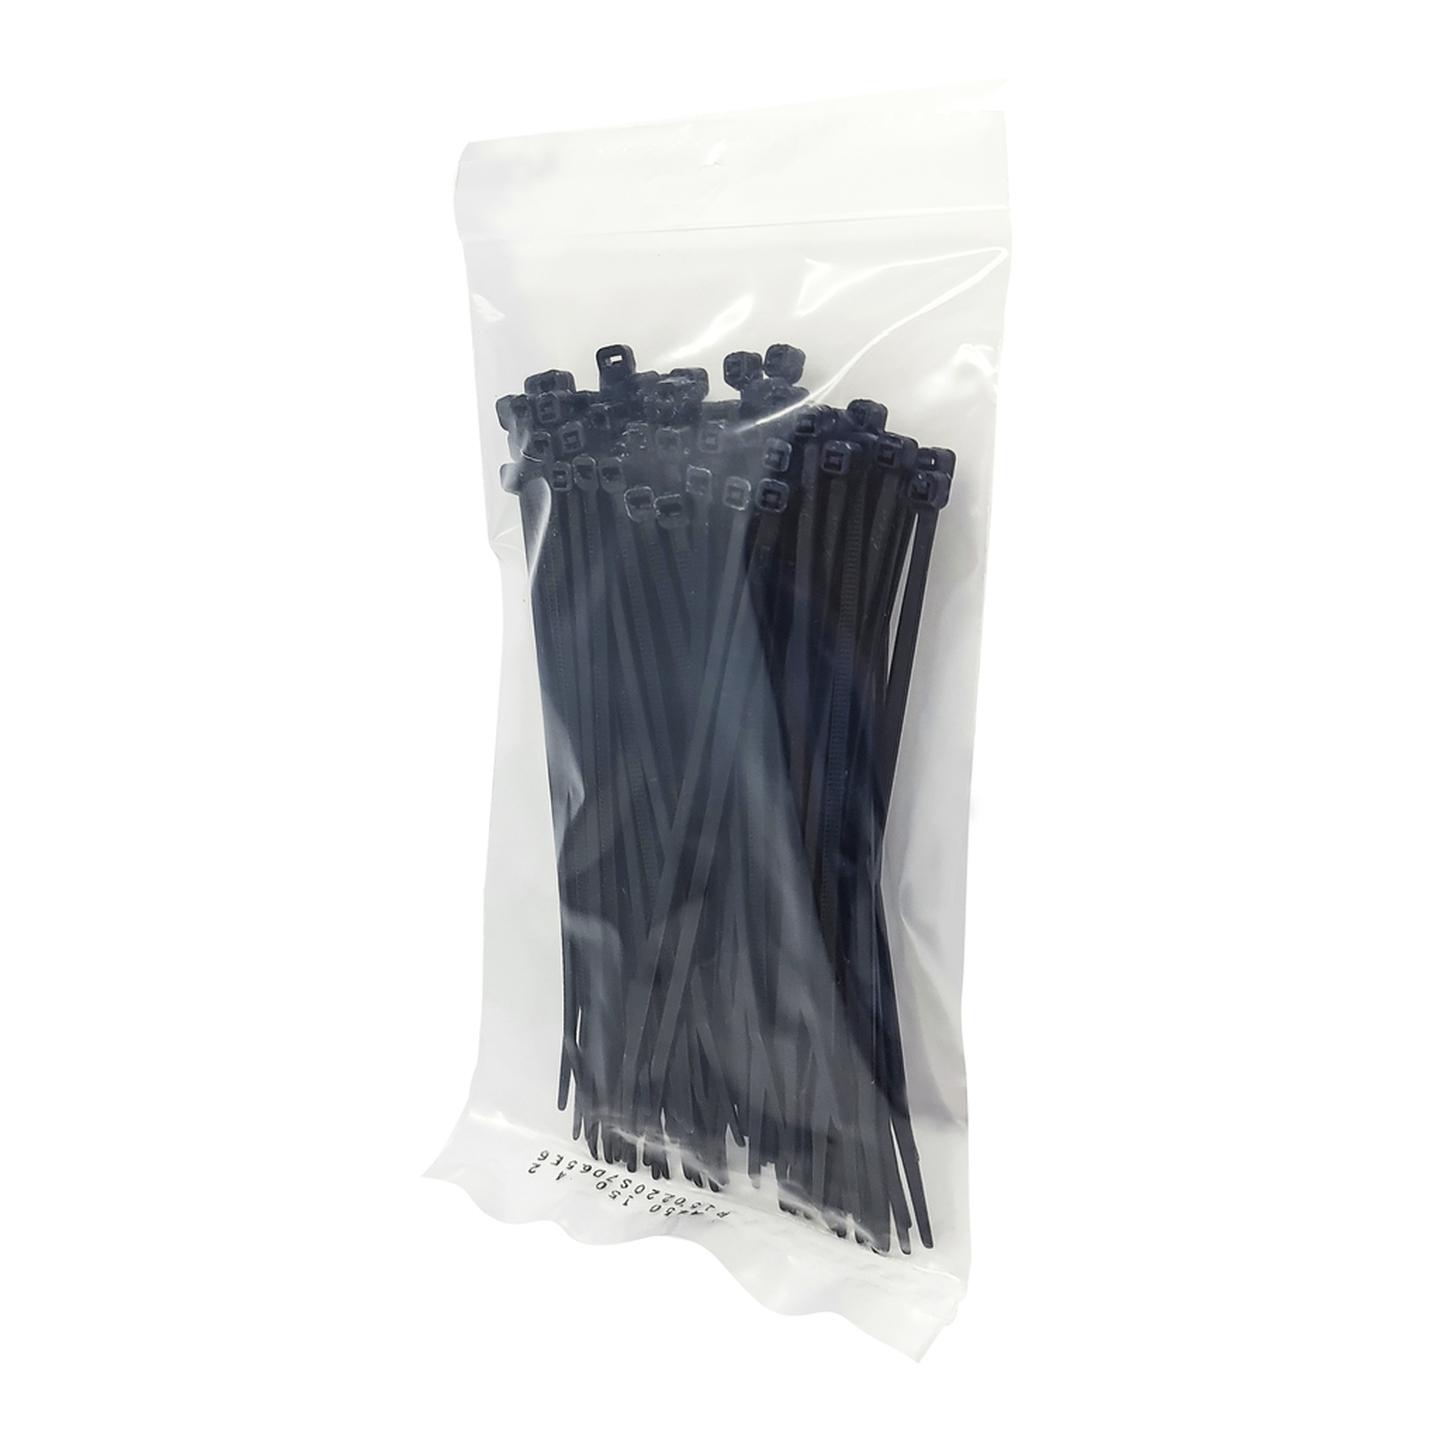 150mm Black Cable Ties - Pack of 100